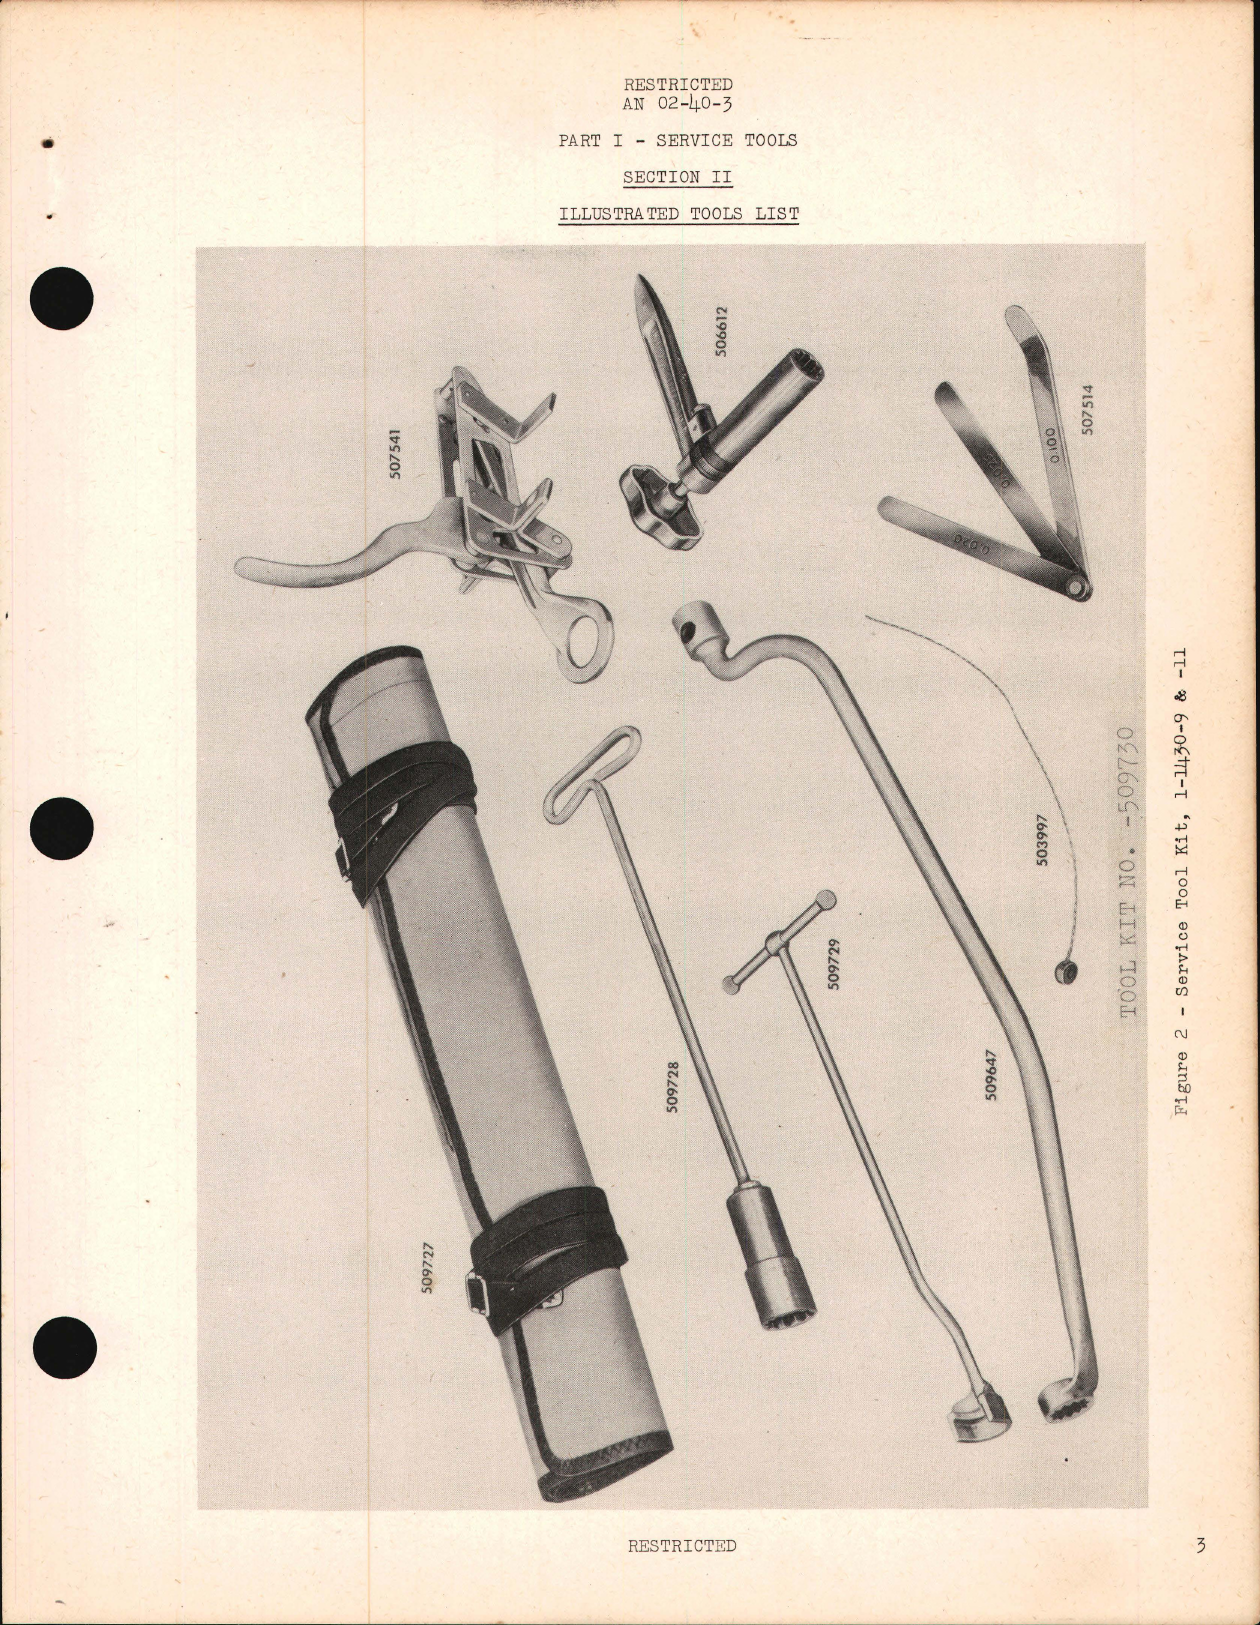 Sample page 5 from AirCorps Library document: Overhaul Tools Catalog for Continental Engines R-670-4, R-670-5, R-670-6, R-670-11, O-170-3, 1-1430-9, and 1-1430-11